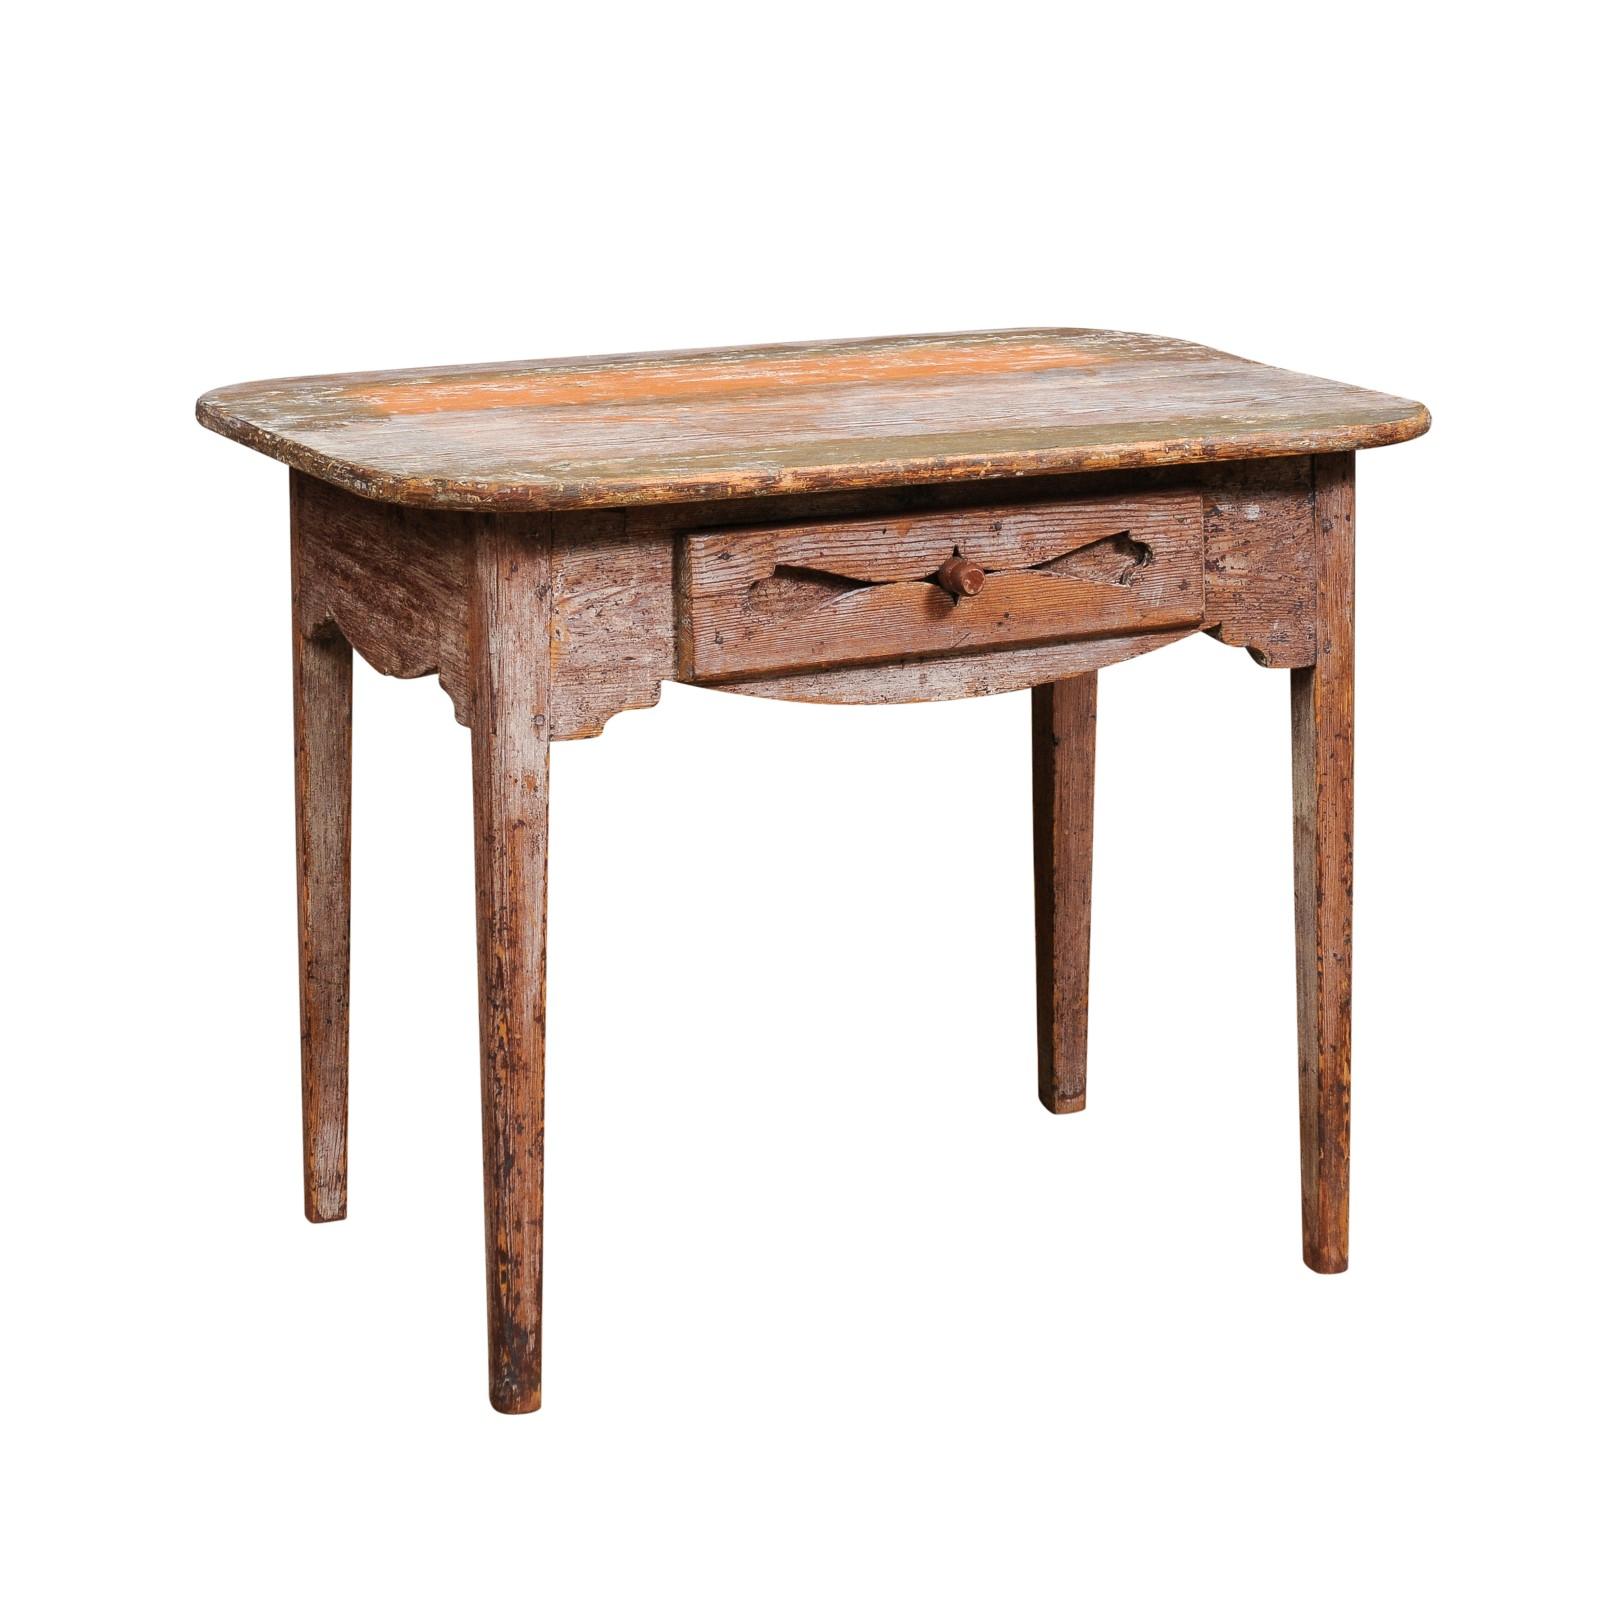 A Swedish side table from circa 1820, with half stripped look, single drawer, tapered legs and weathered appearance. This Swedish side table from circa 1820 exudes rustic charm and authenticity. It has been meticulously scraped back to its original